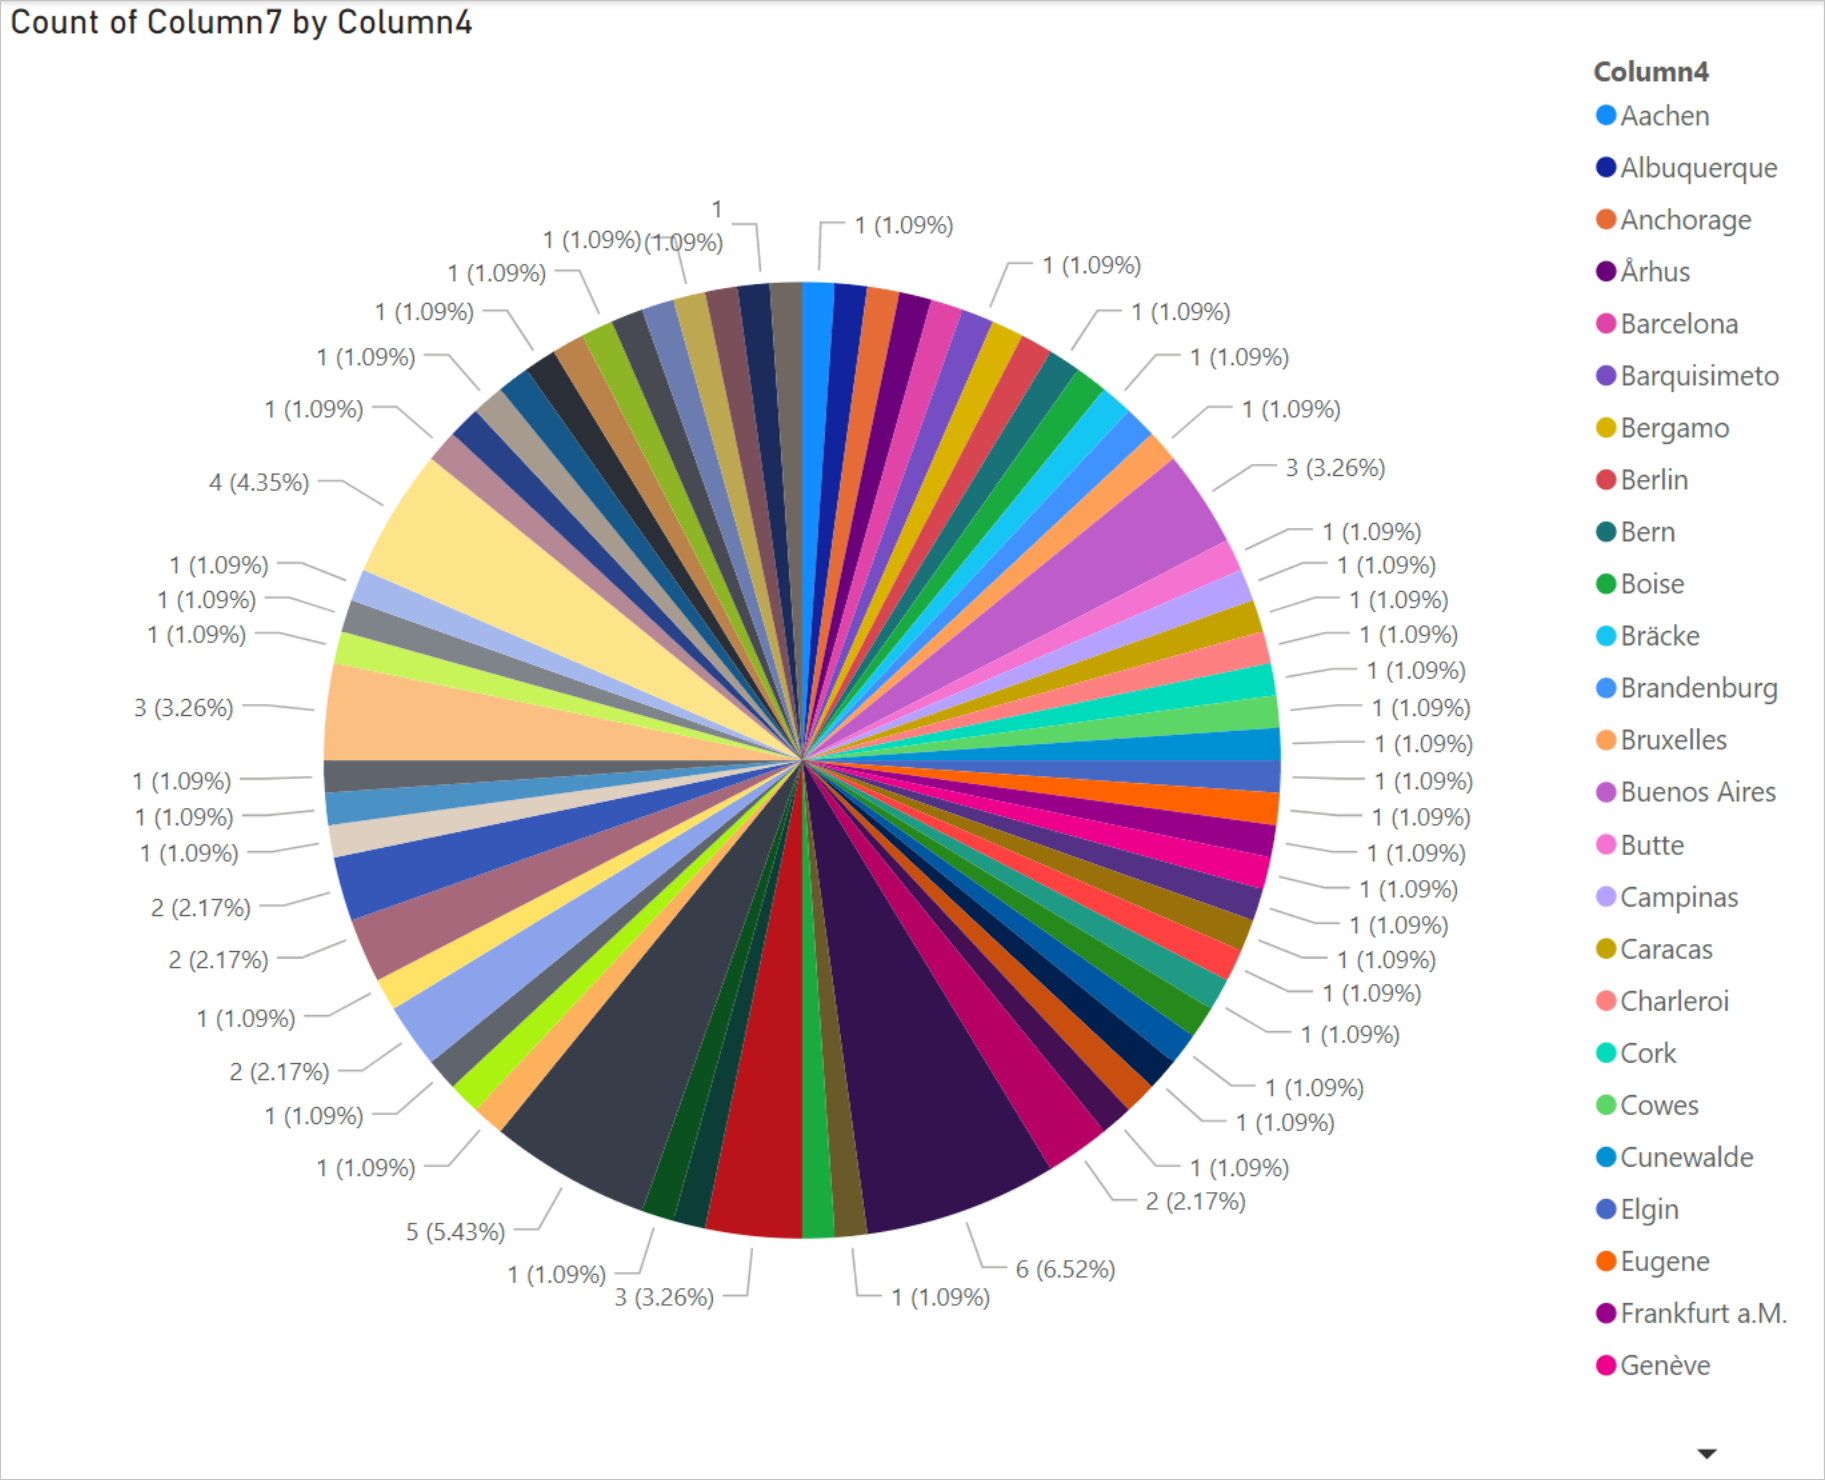 Screenshot of pie chart showing the percentages of each slice of the pie, along with color coding of each of the locations, and a column containing all locations and their color code on the right side.